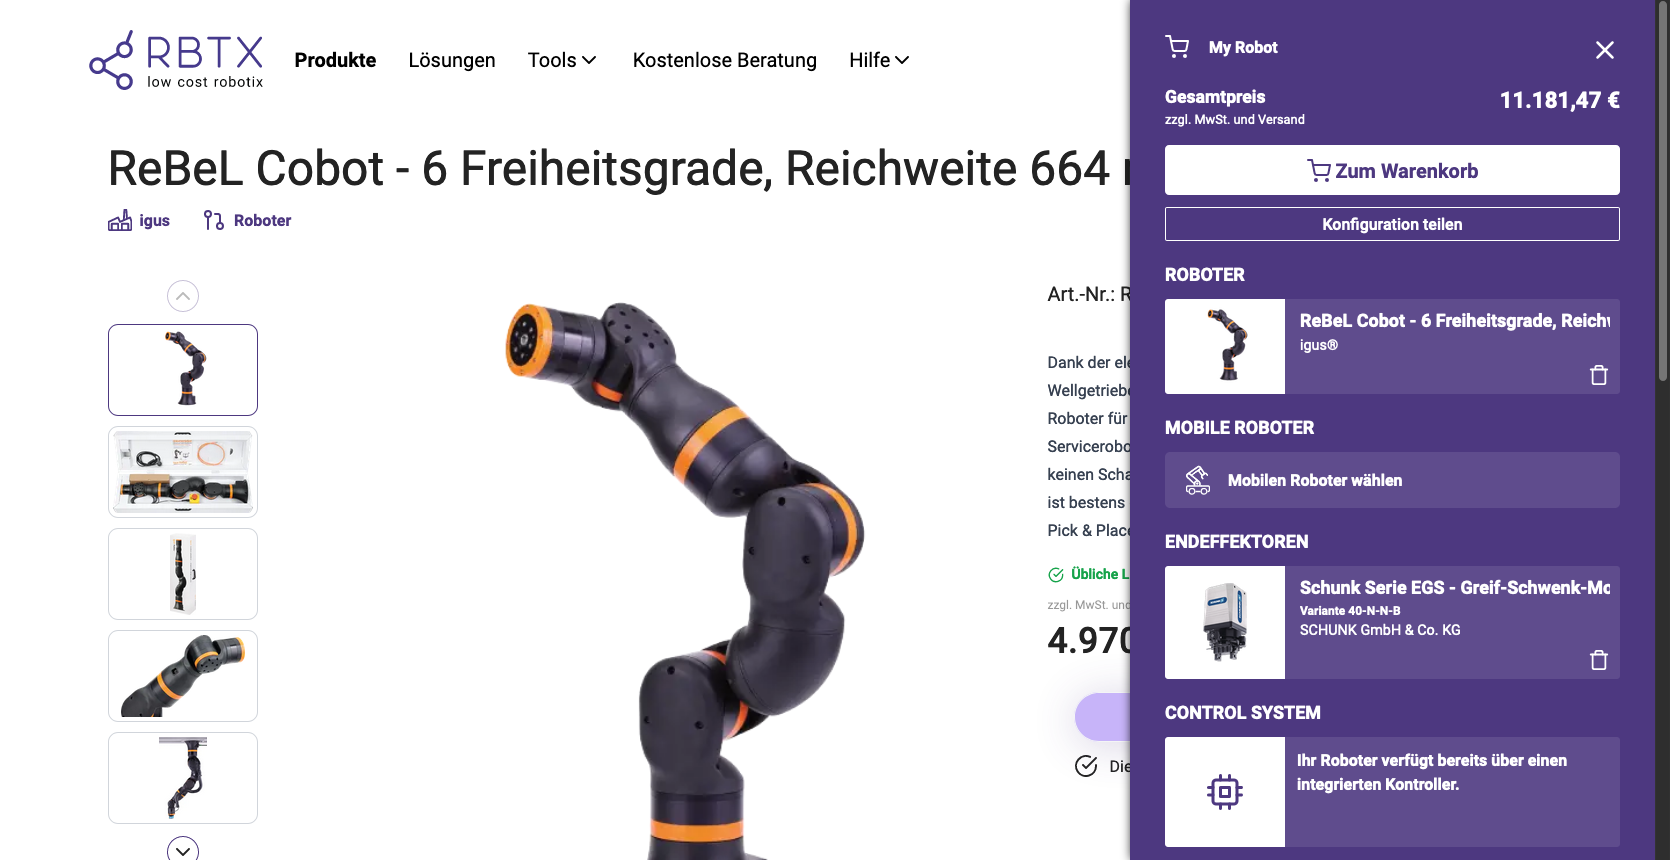 A screenshot of an online marketplac, showing the possibility to add robotics components to a shopping cart